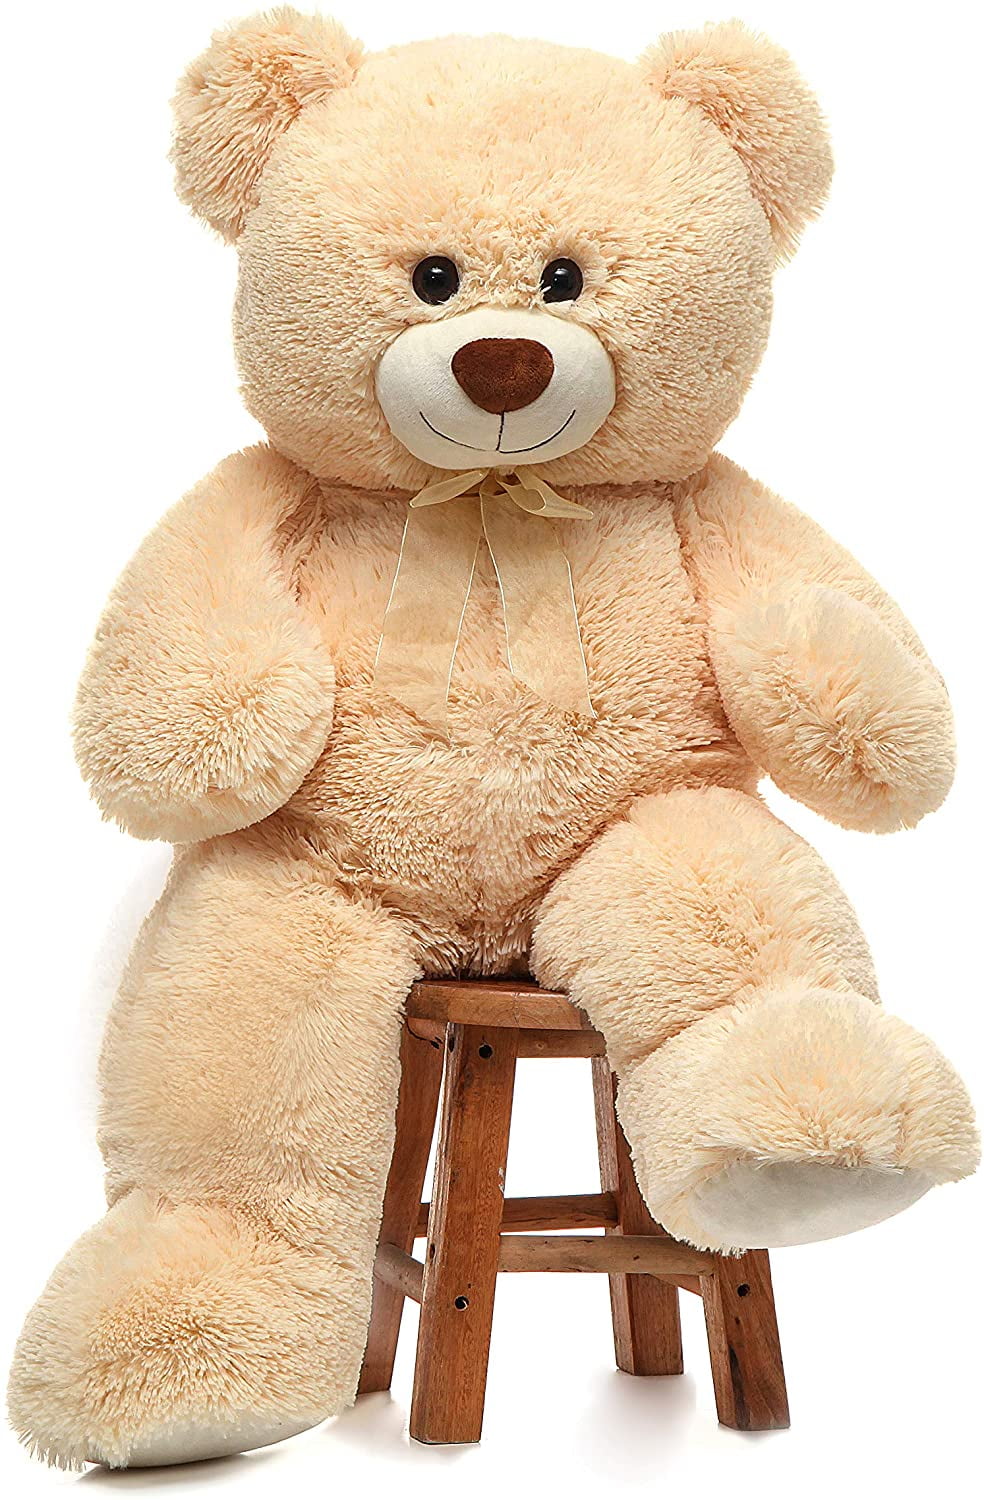 Giant Teddy Bear Soft Stuffed Plush Animals Toy 20" for Sweetheart Birthday Gift for sale online 